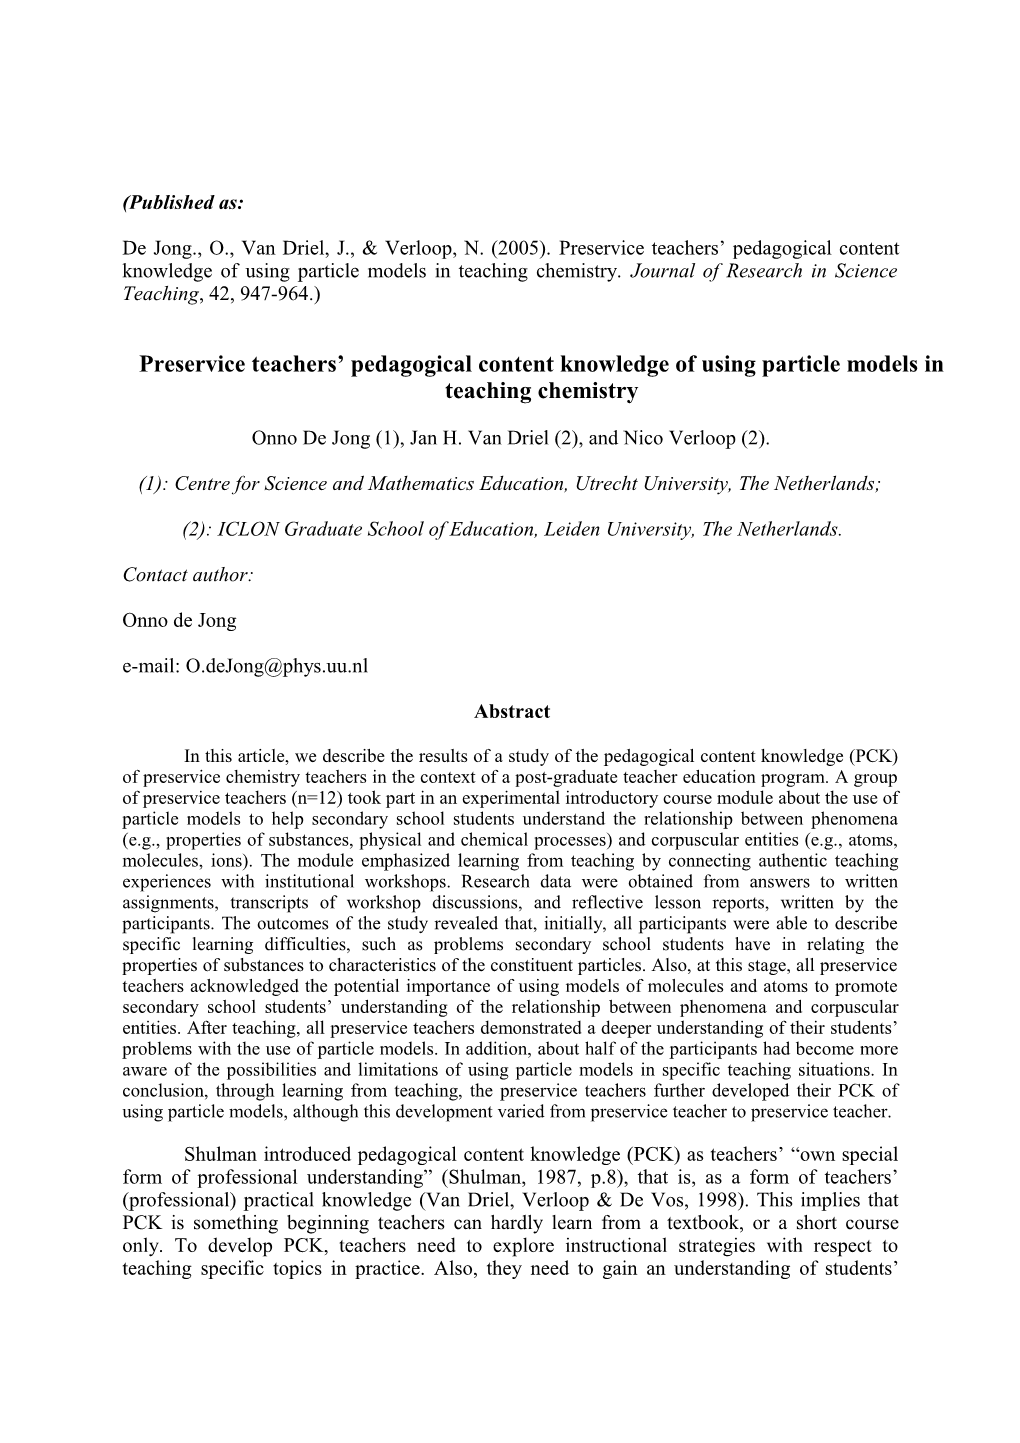 Preservice Teachers Pedagogical Content Knowledge of Using Particle Models in Teaching Chemistry